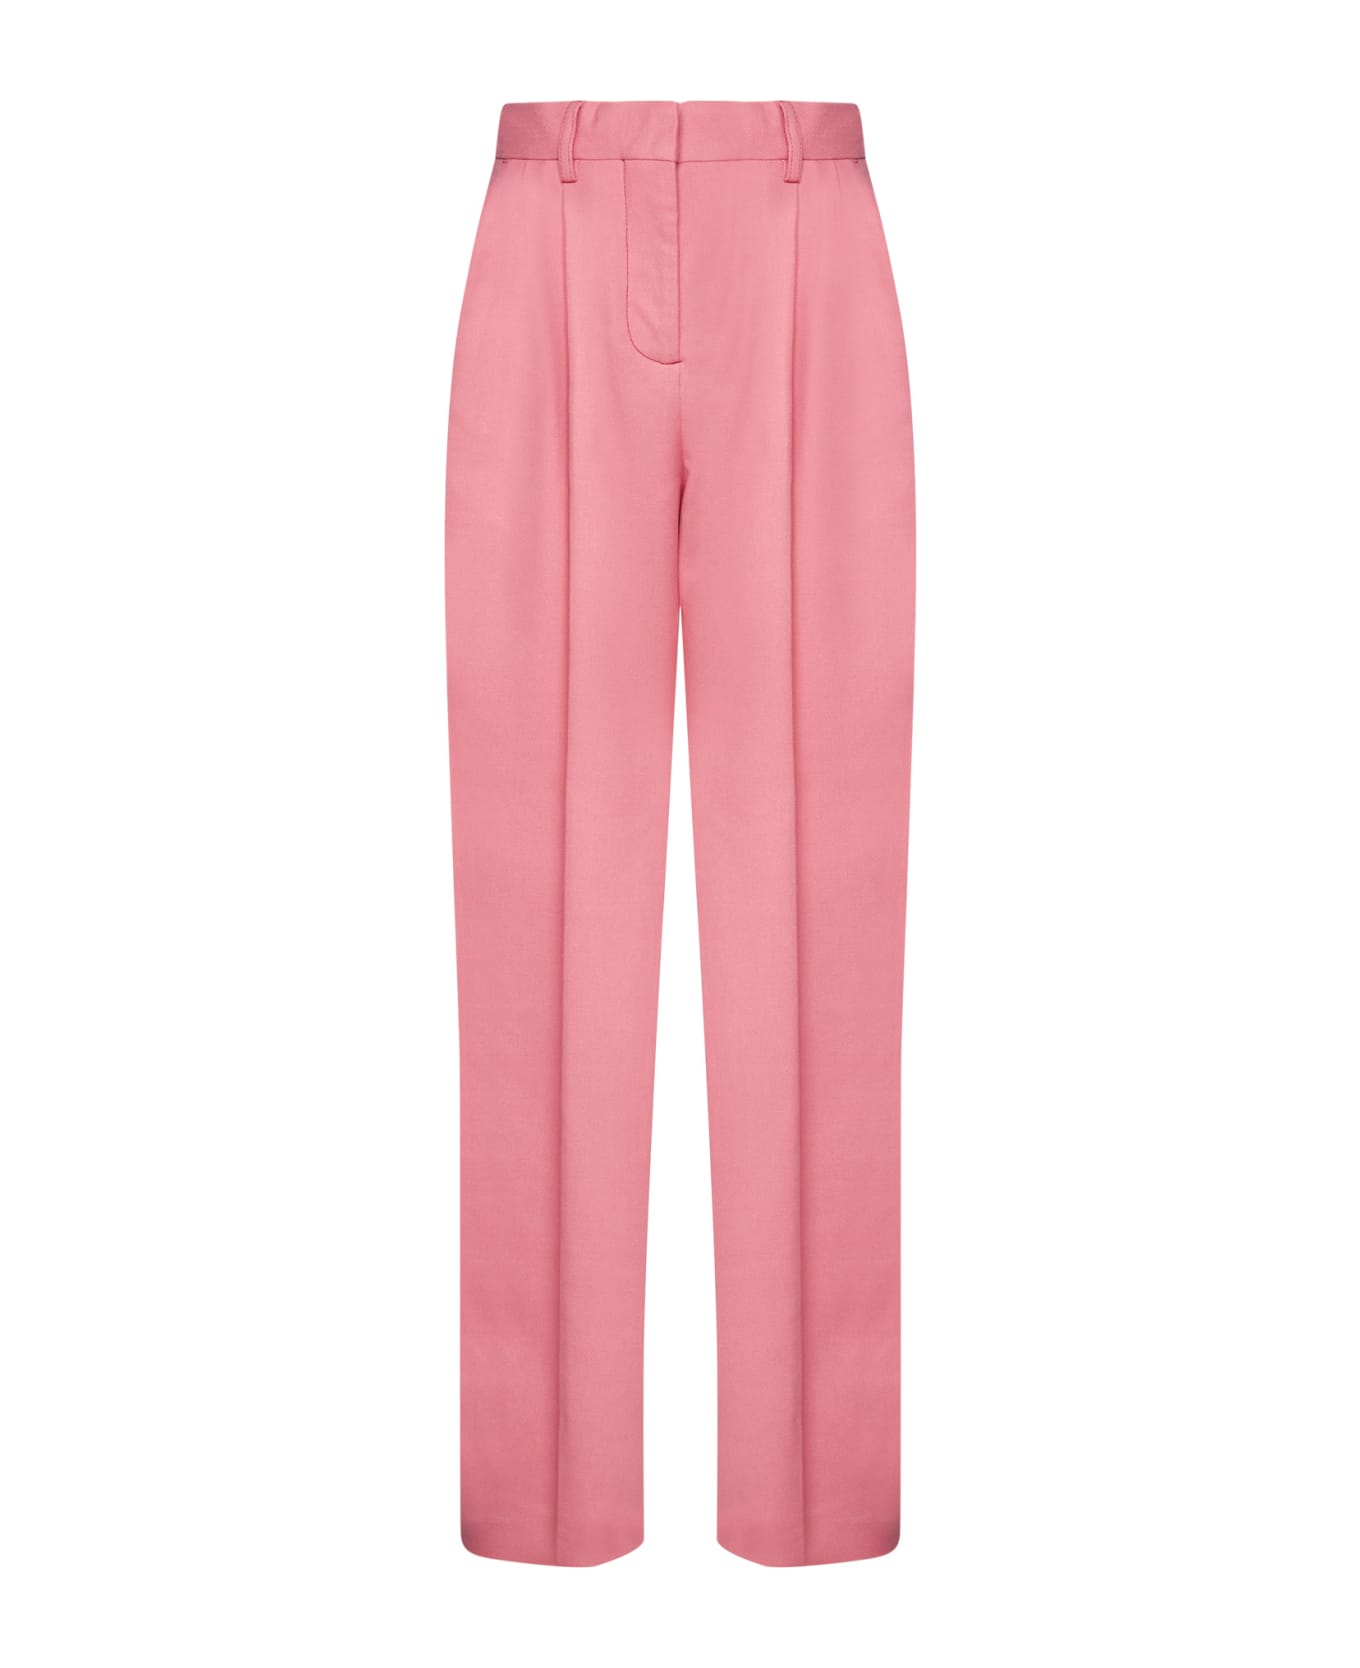 See by Chloé Pants - Sunset pink